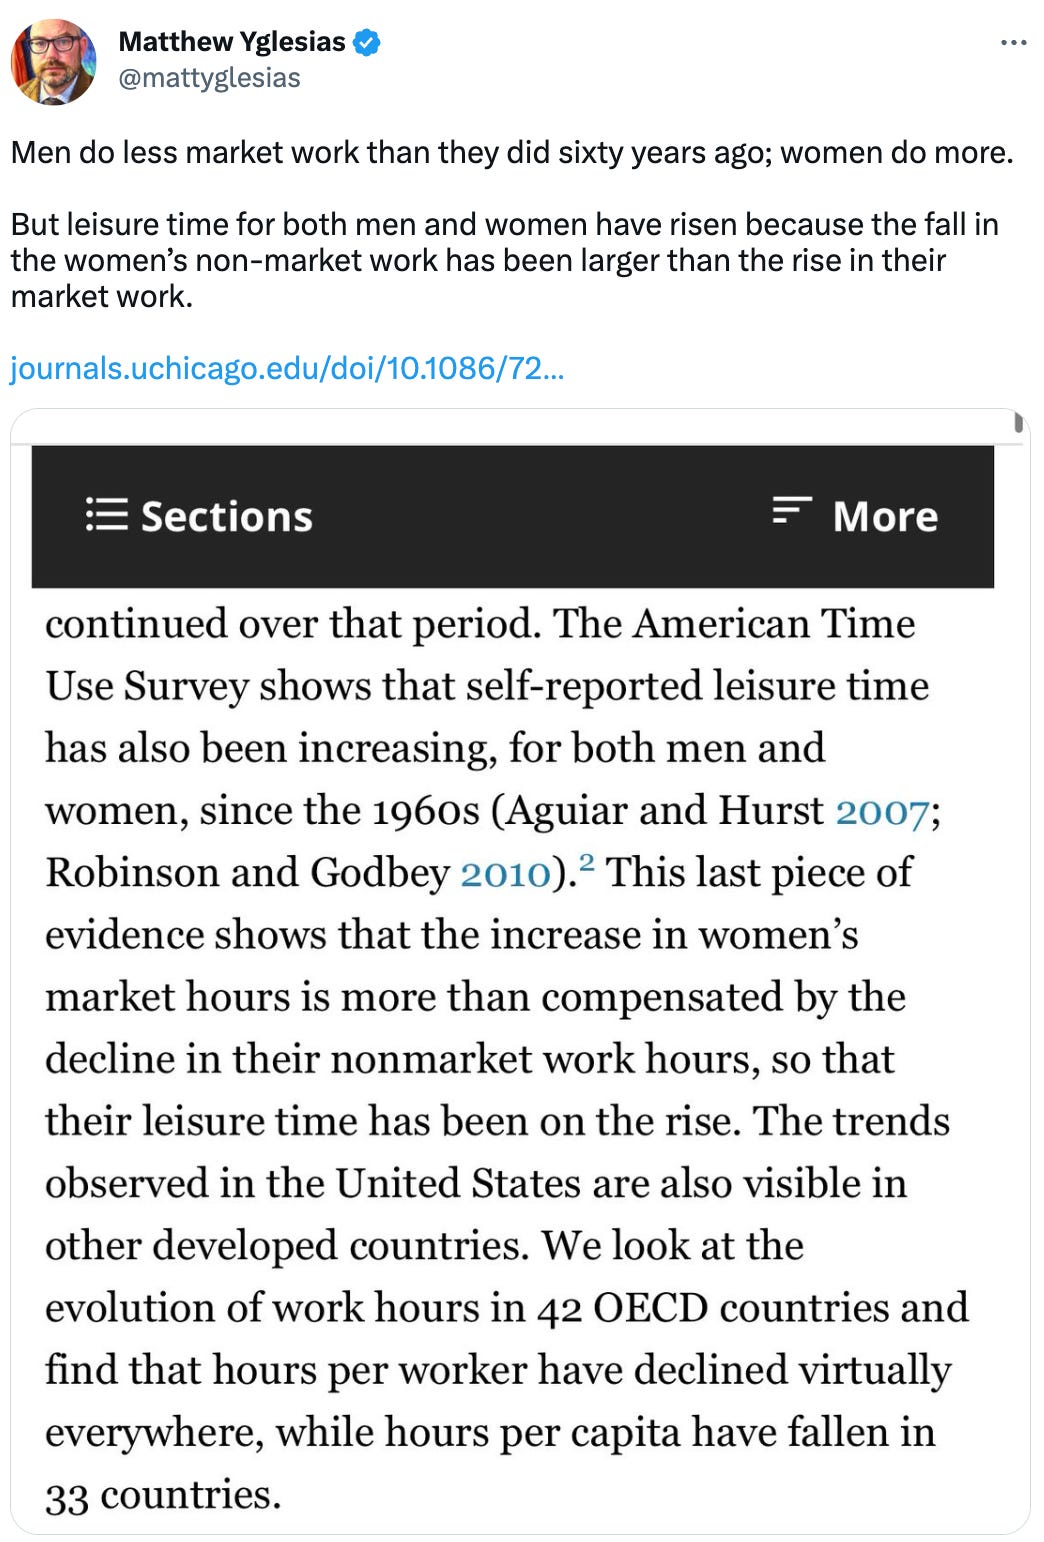  See new Tweets Conversation Matthew Yglesias @mattyglesias Men do less market work than they did sixty years ago; women do more.   But leisure time for both men and women have risen because the fall in the women’s non-market work has been larger than the rise in their market work.   https://journals.uchicago.edu/doi/10.1086/723717